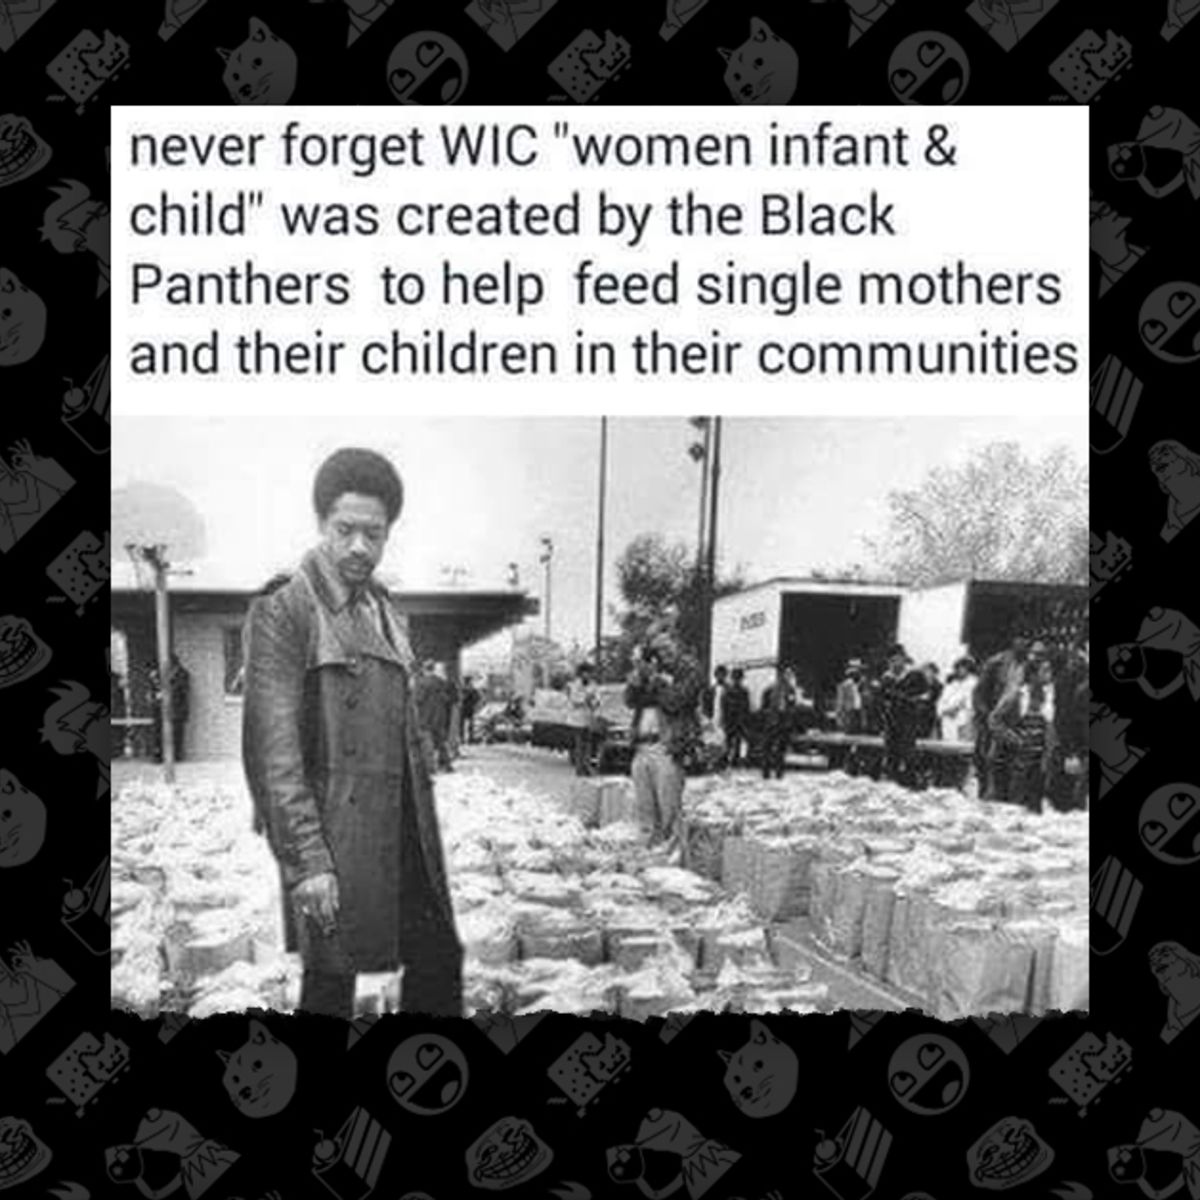 Did the Black Panthers Create the WIC Food Program?